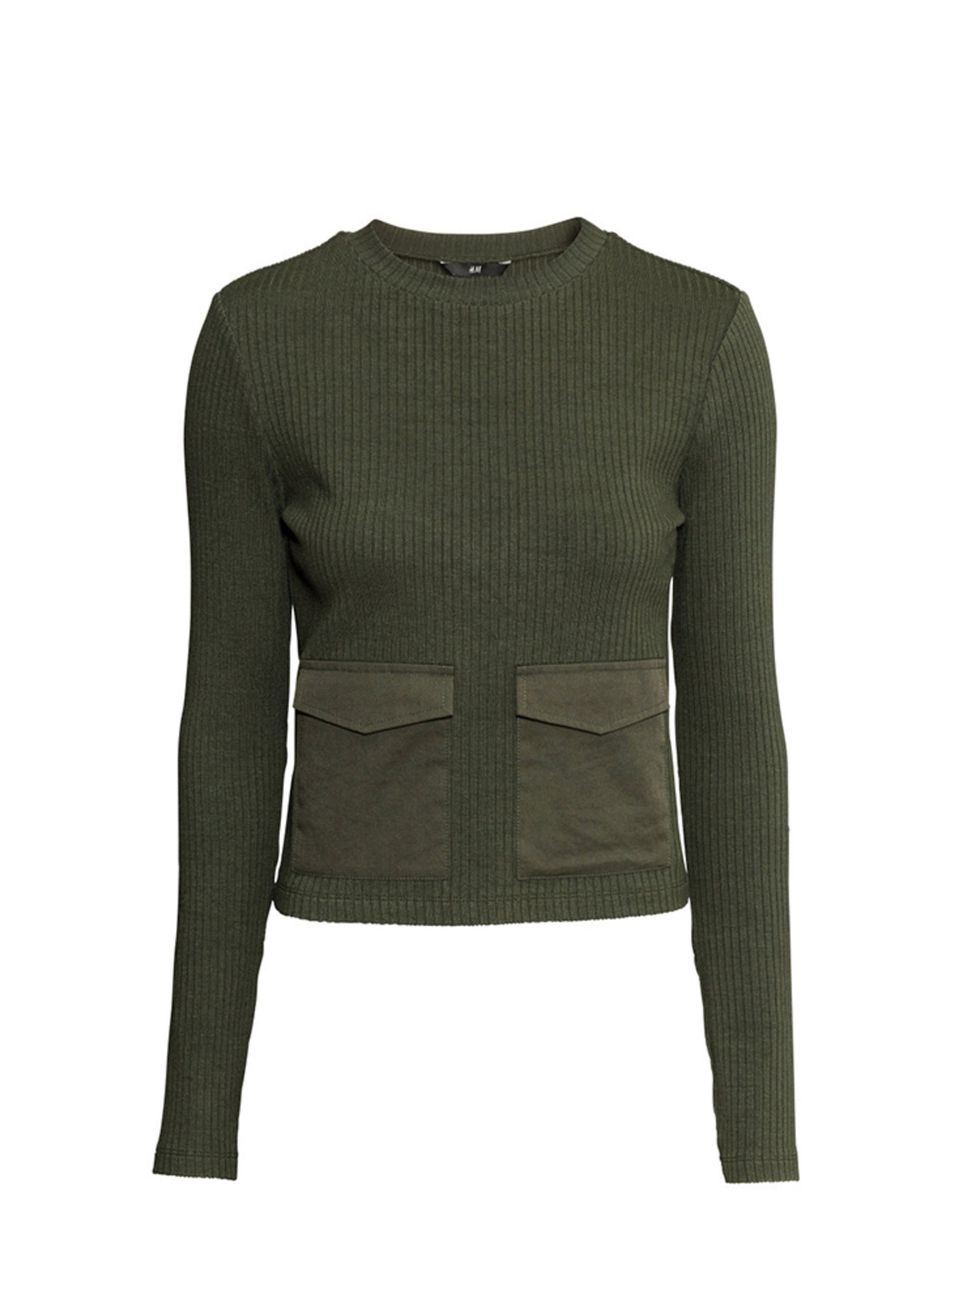 <p><a href="http://www.hm.com/gb/product/89093?article=89093-A" target="_blank">H&M</a> jumper, £7.99</p>